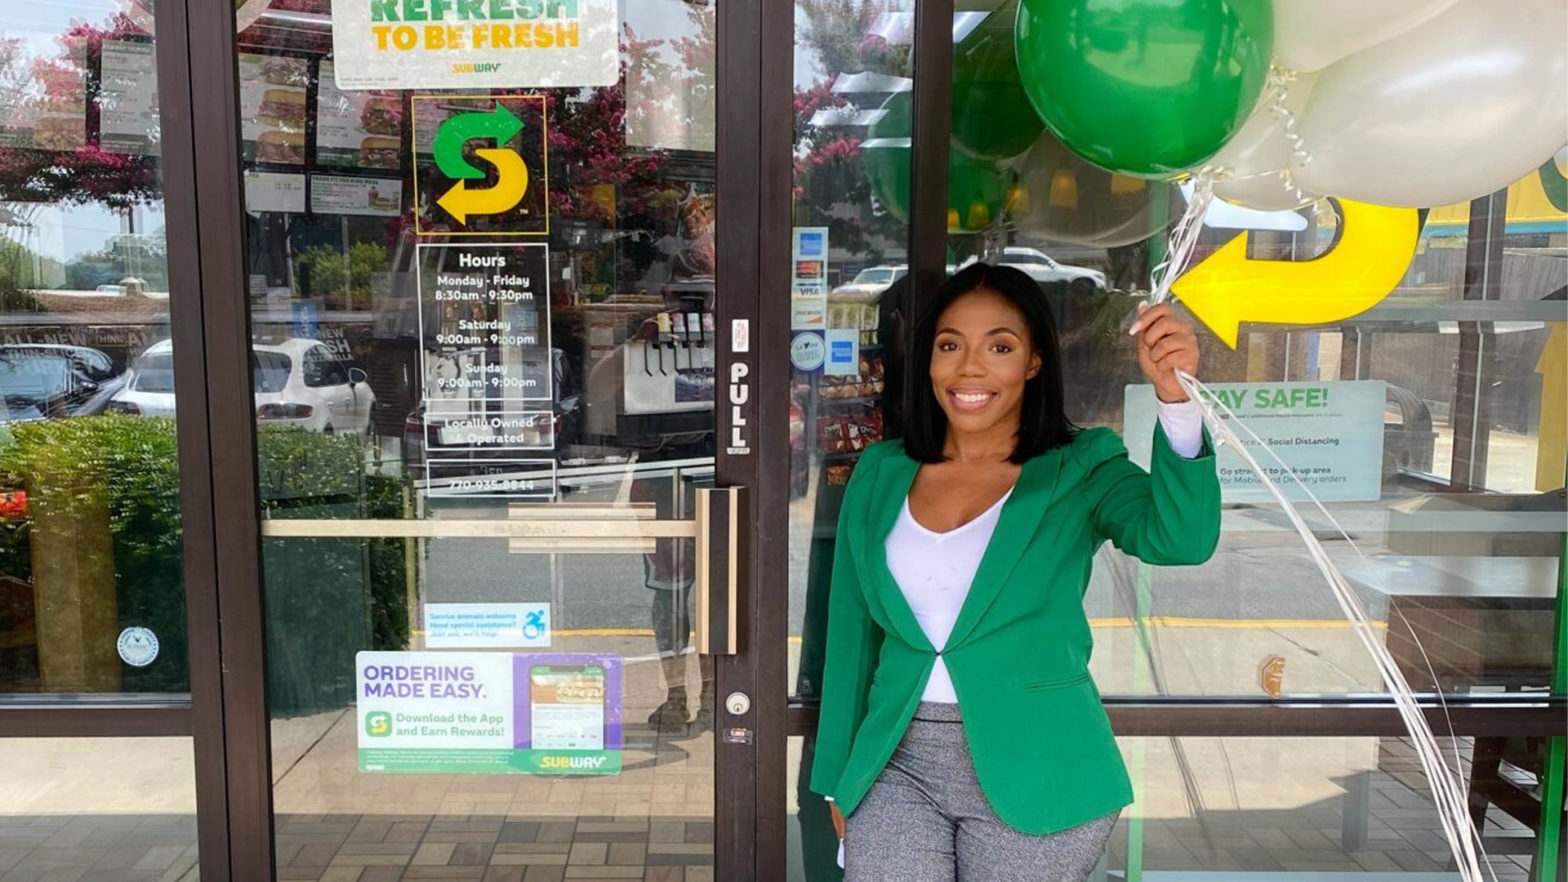 HBCU Alumna Asia Thomas Becomes The First Black Woman To Own A Subway Franchise In This Georgia City